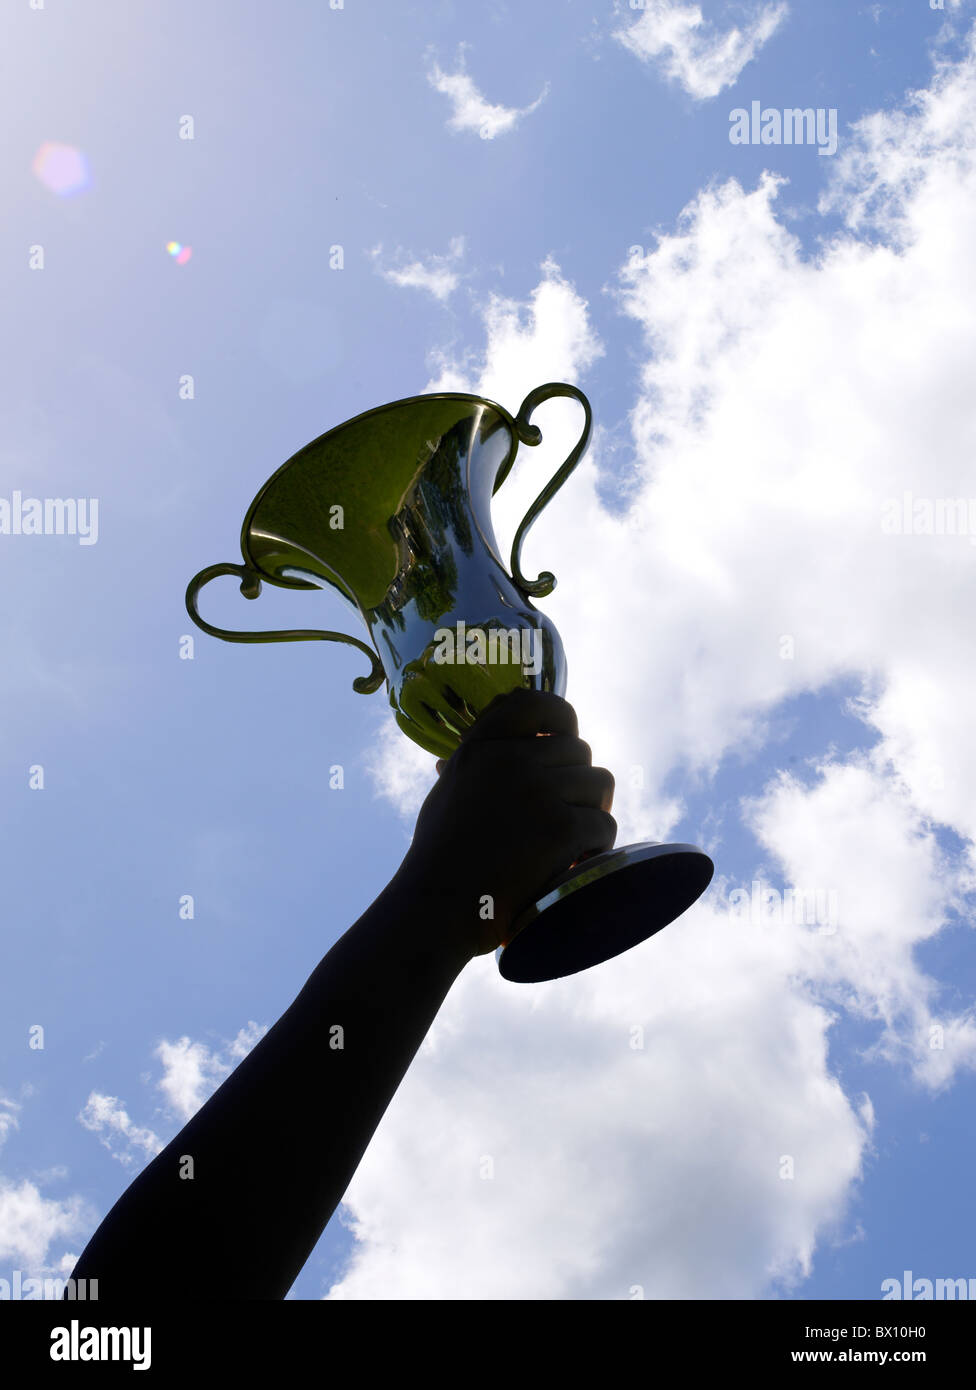 A victorious person holds up a large, gleaming trophy cup, silhouetted against a vivid blue sky with a few wispy clouds. Stock Photo